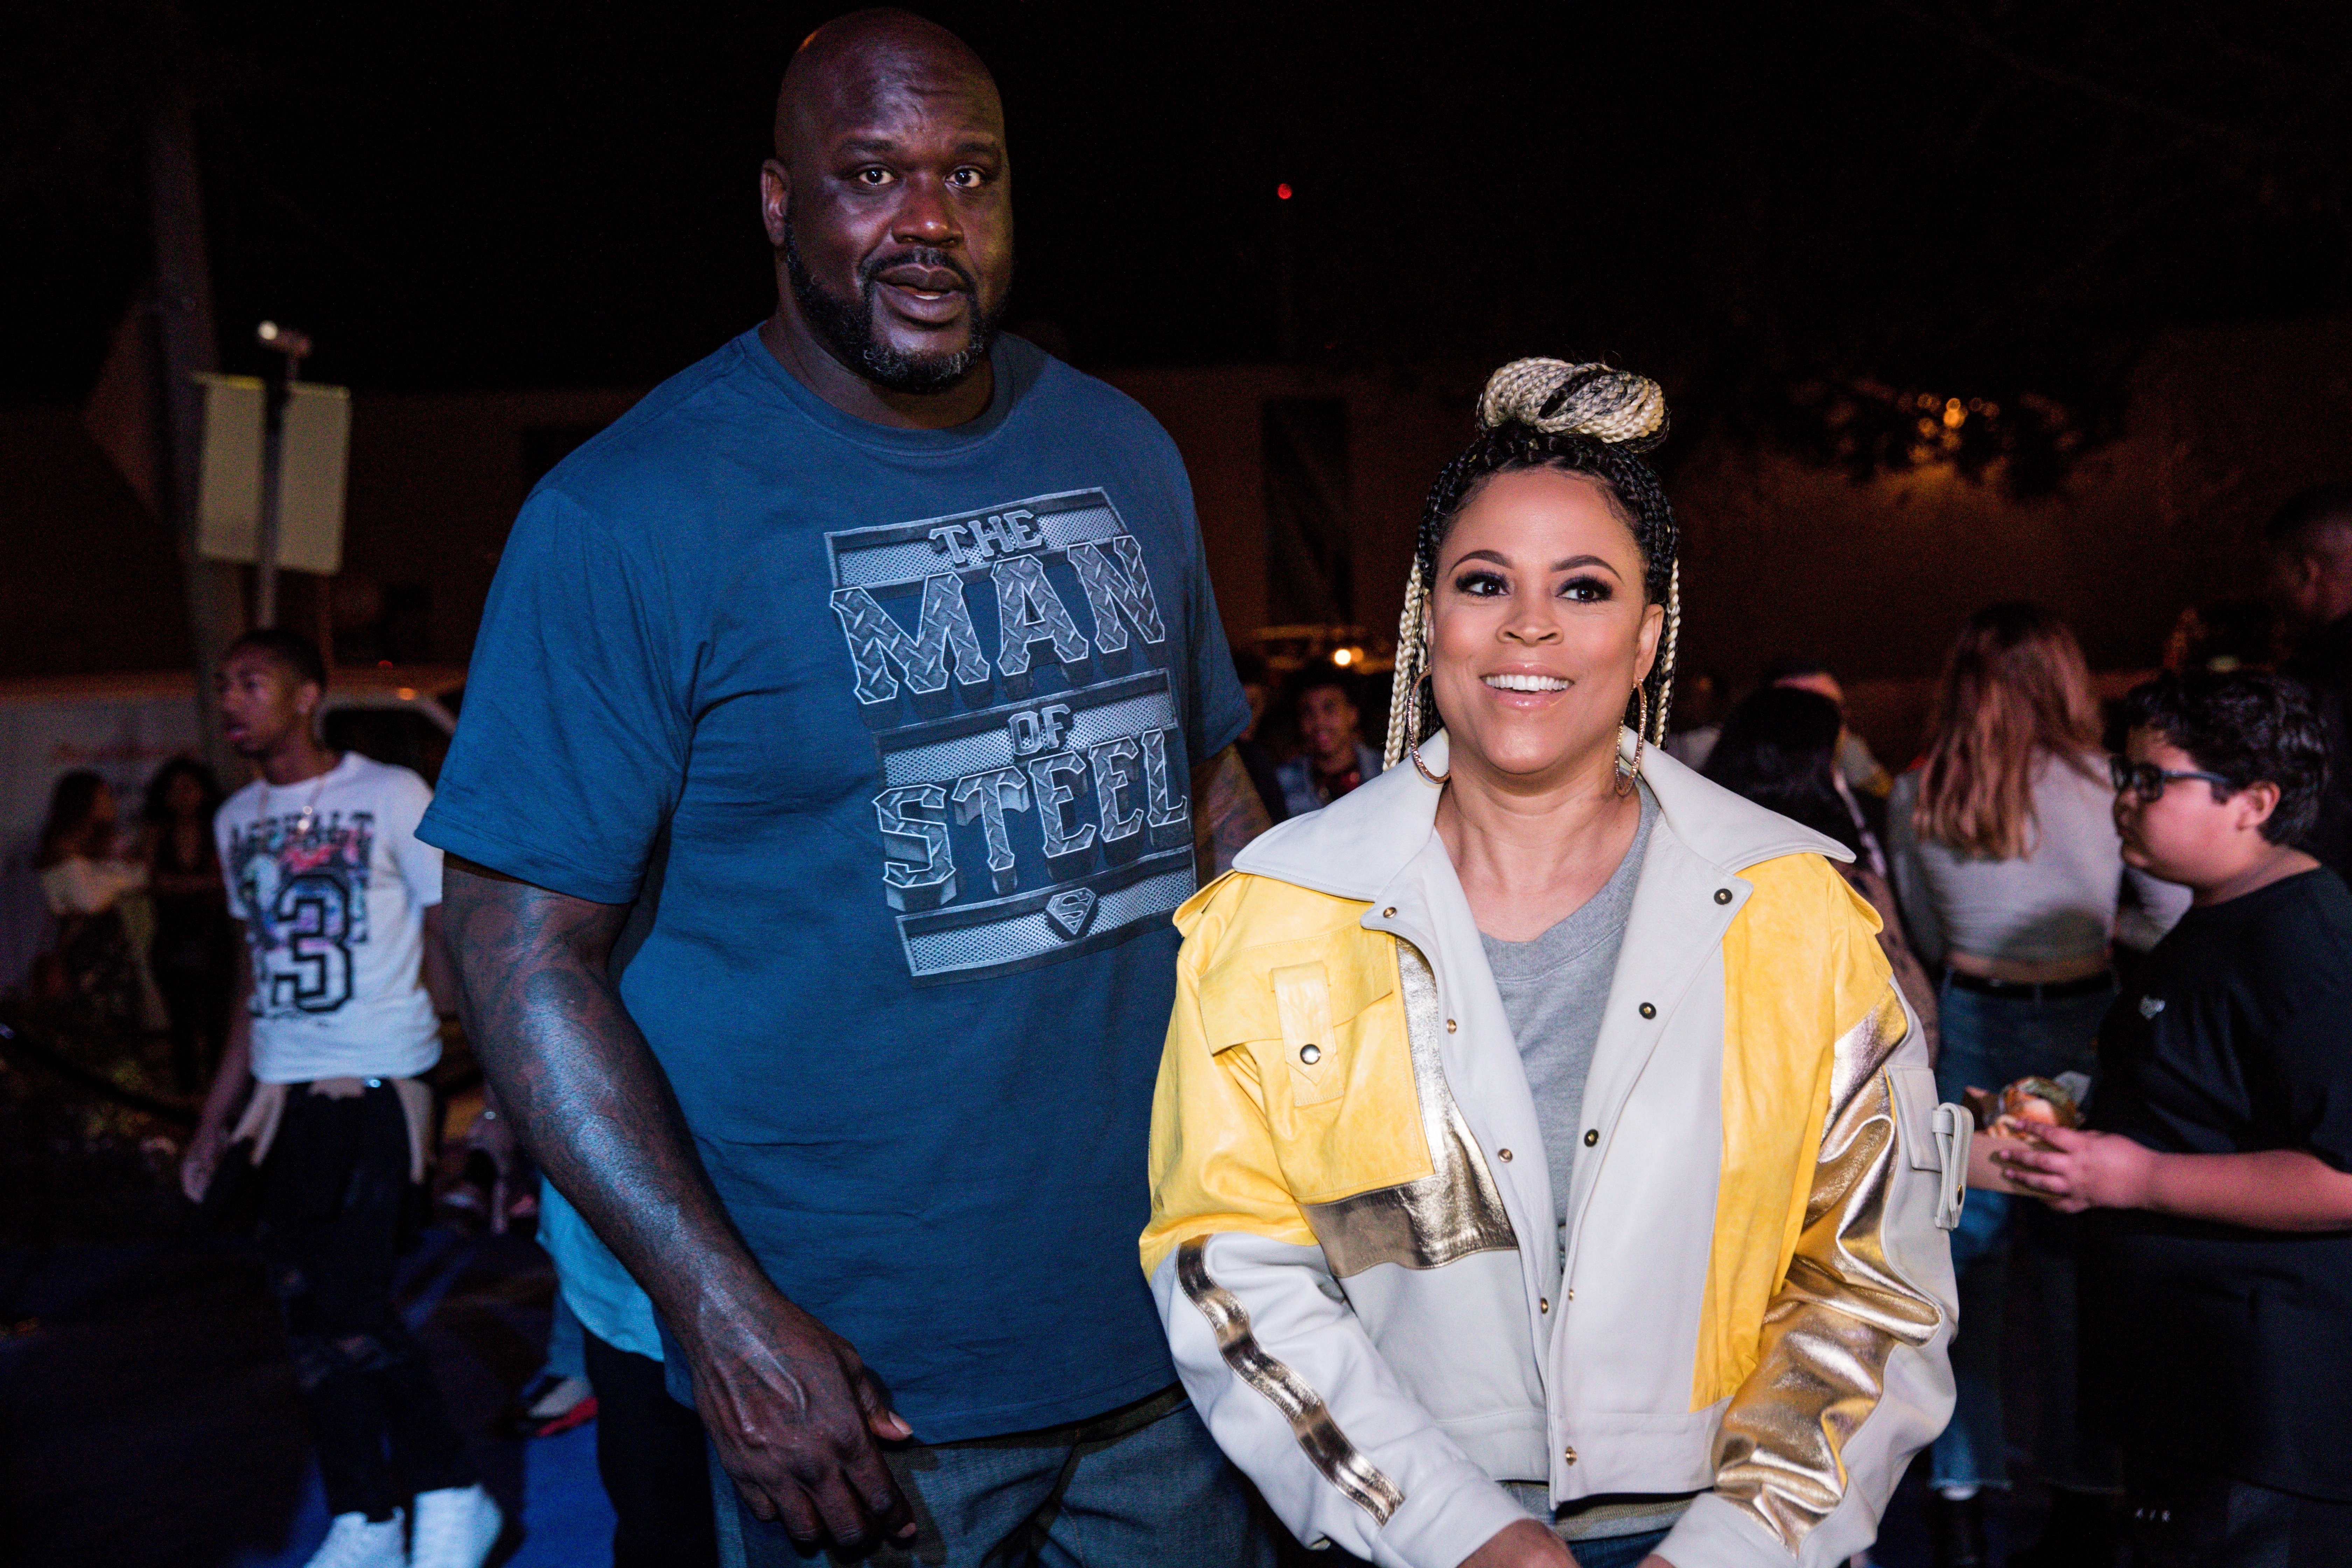 Shaunie O'Neal and Shaquille O'Neal celebrate Shareef O'Neal's 18th birthday party. Jan. 13, 2018. | Photo: GettyImages/Global Images of Ukraine